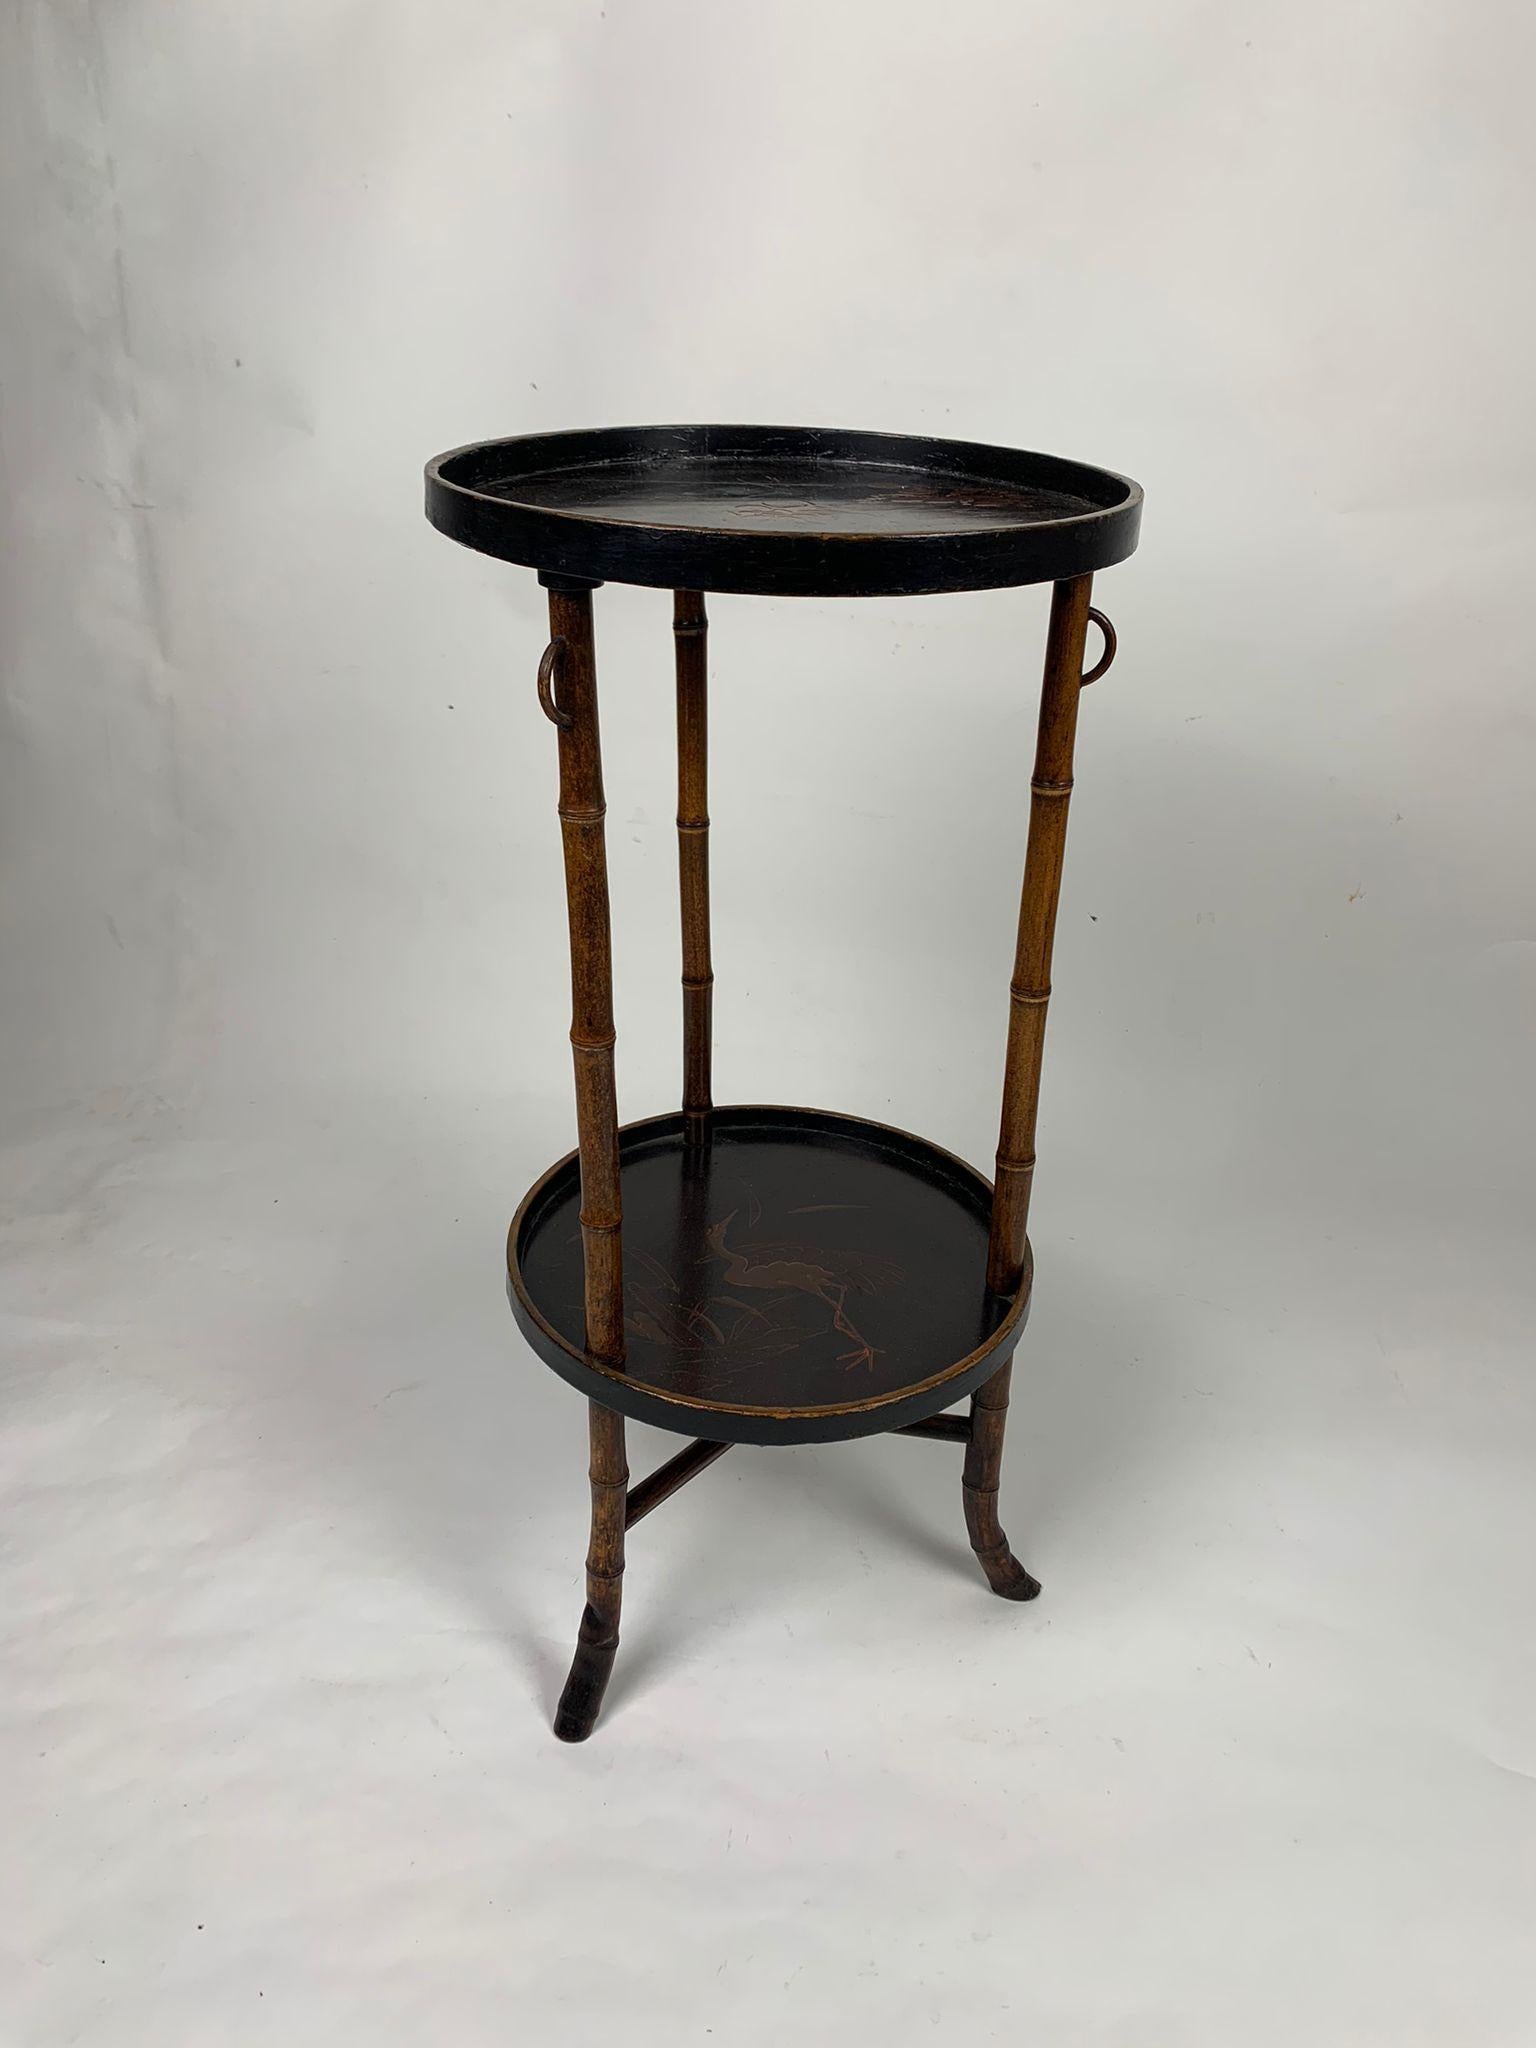 Round bamboo table with decorations, Asian art.
Bamboo table with two round shelves with decorations. 
The first shelf depicts an ox and a naturalistic landscape, the second a heron near a lake. 

Very good condition
Measurements: 26 x 76 h cm 

